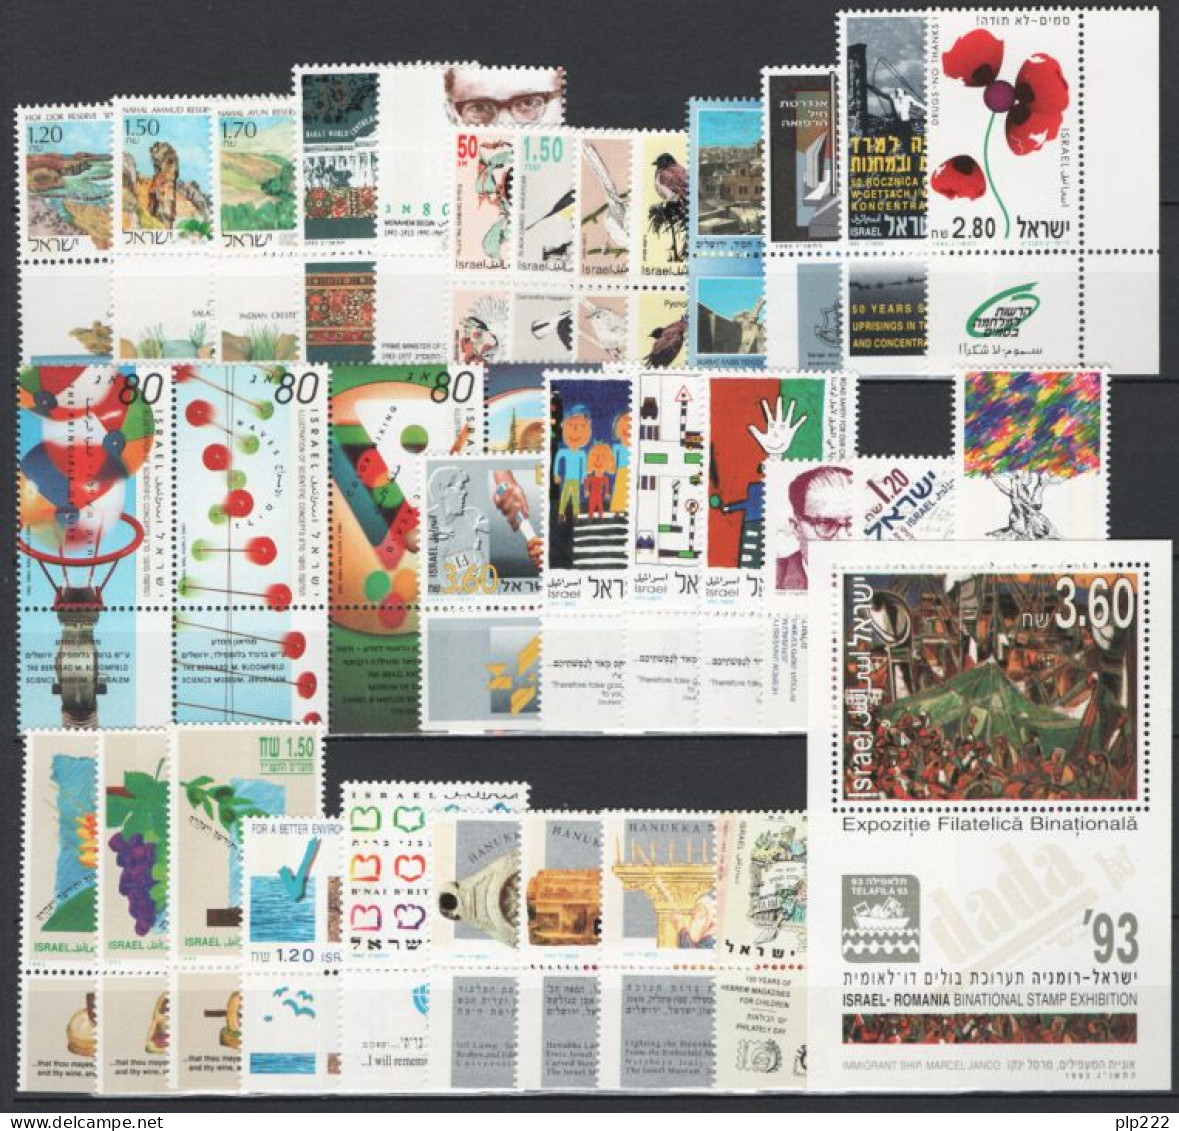 Israele 1993 Annata Completa Con Appendice / Complete Year Set With Tab **/MNH VF - Full Years